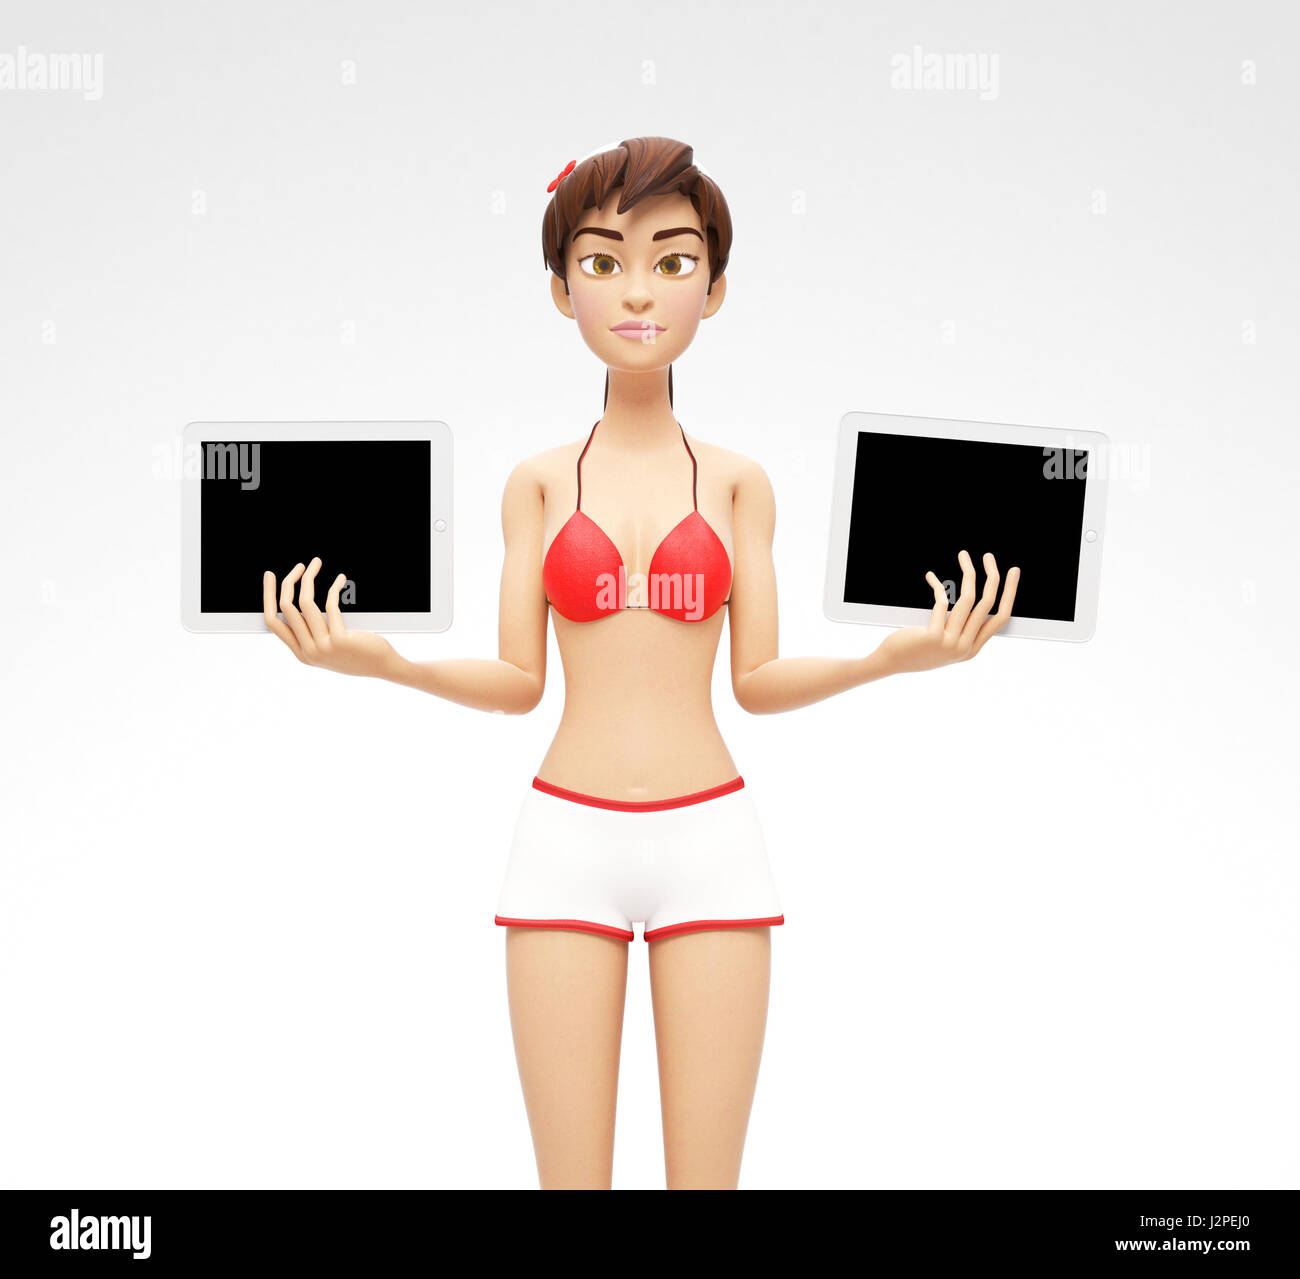 Two Tablet Device Mockups With Blank Screens Held by Serious Jenny - 3D Cartoon Female Character in Swimsuit Bikini Stock Photo